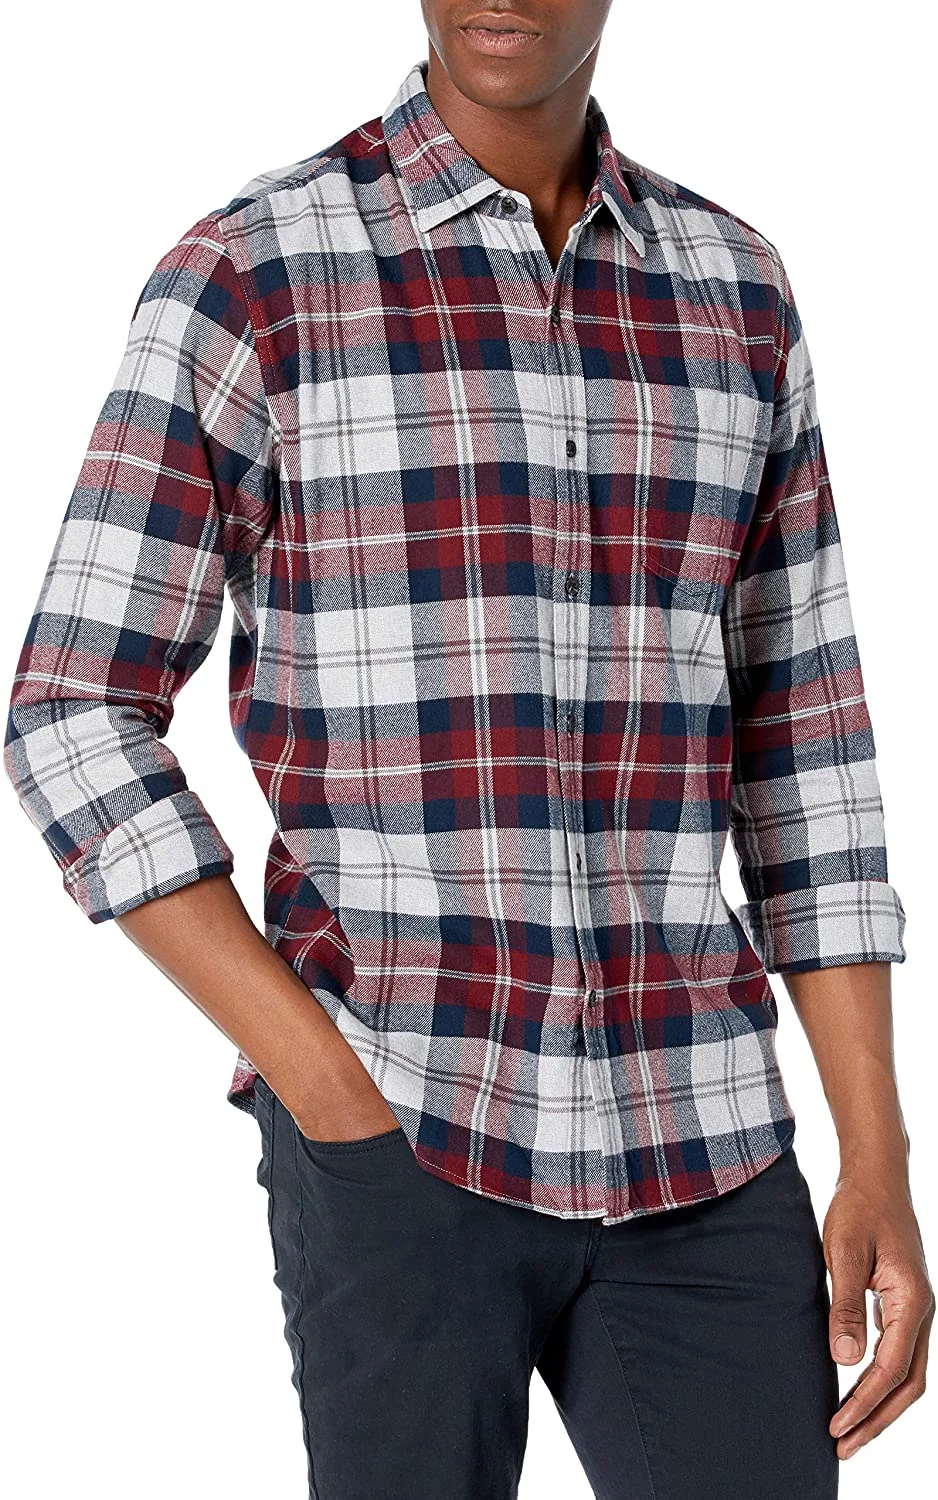 Wholesale Mens Regular Fit Long Sleeve Flannel Shirt Manufacturers In Bangladesh Factory Supplier